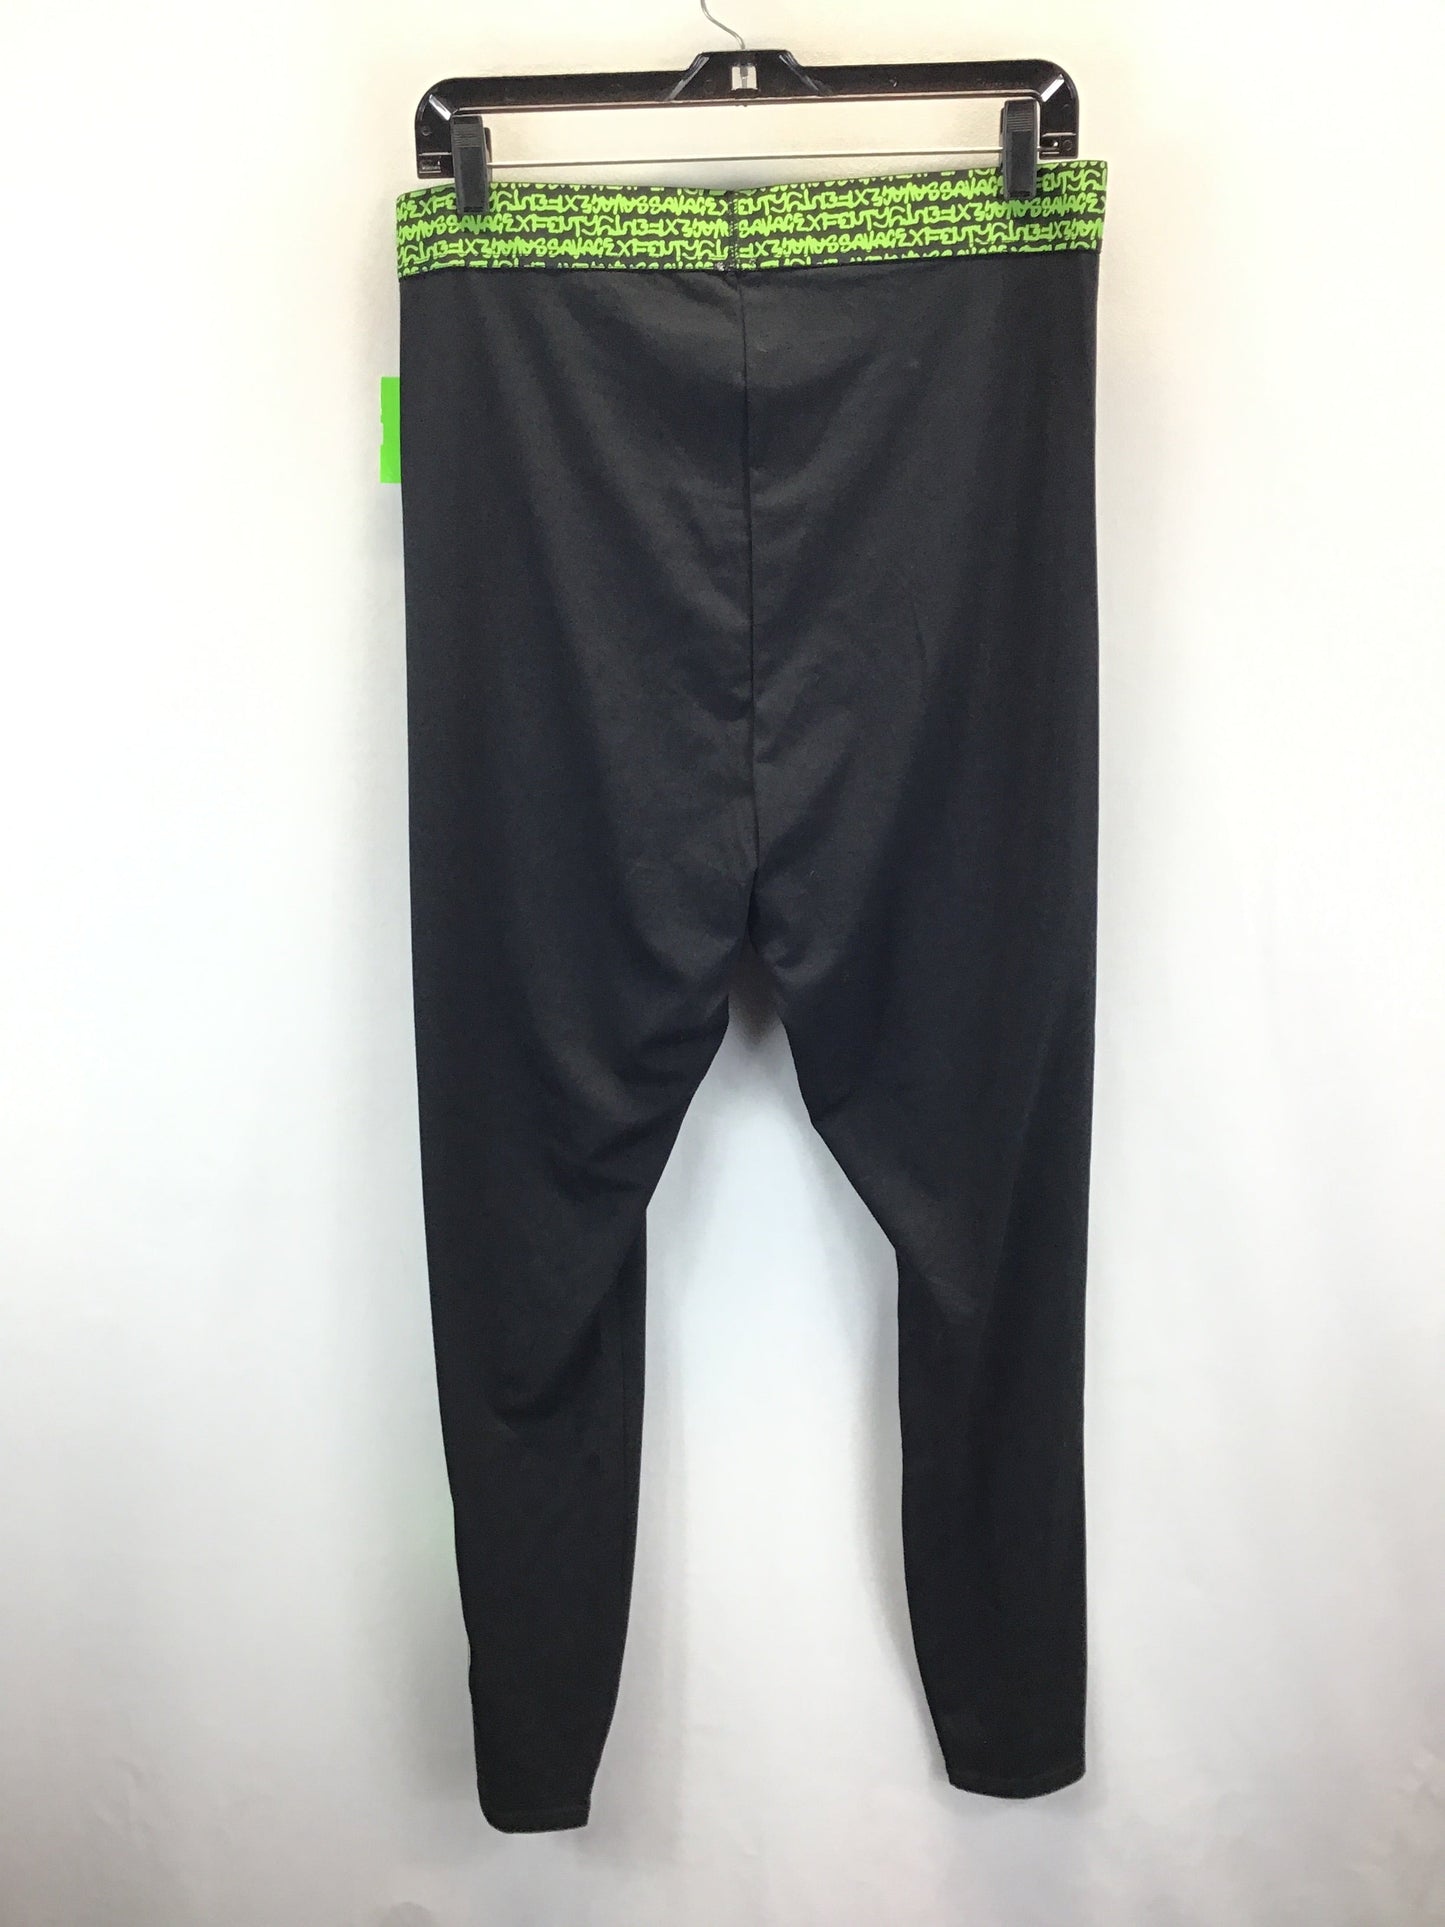 Black & Green Athletic Leggings Clothes Mentor, Size 2x